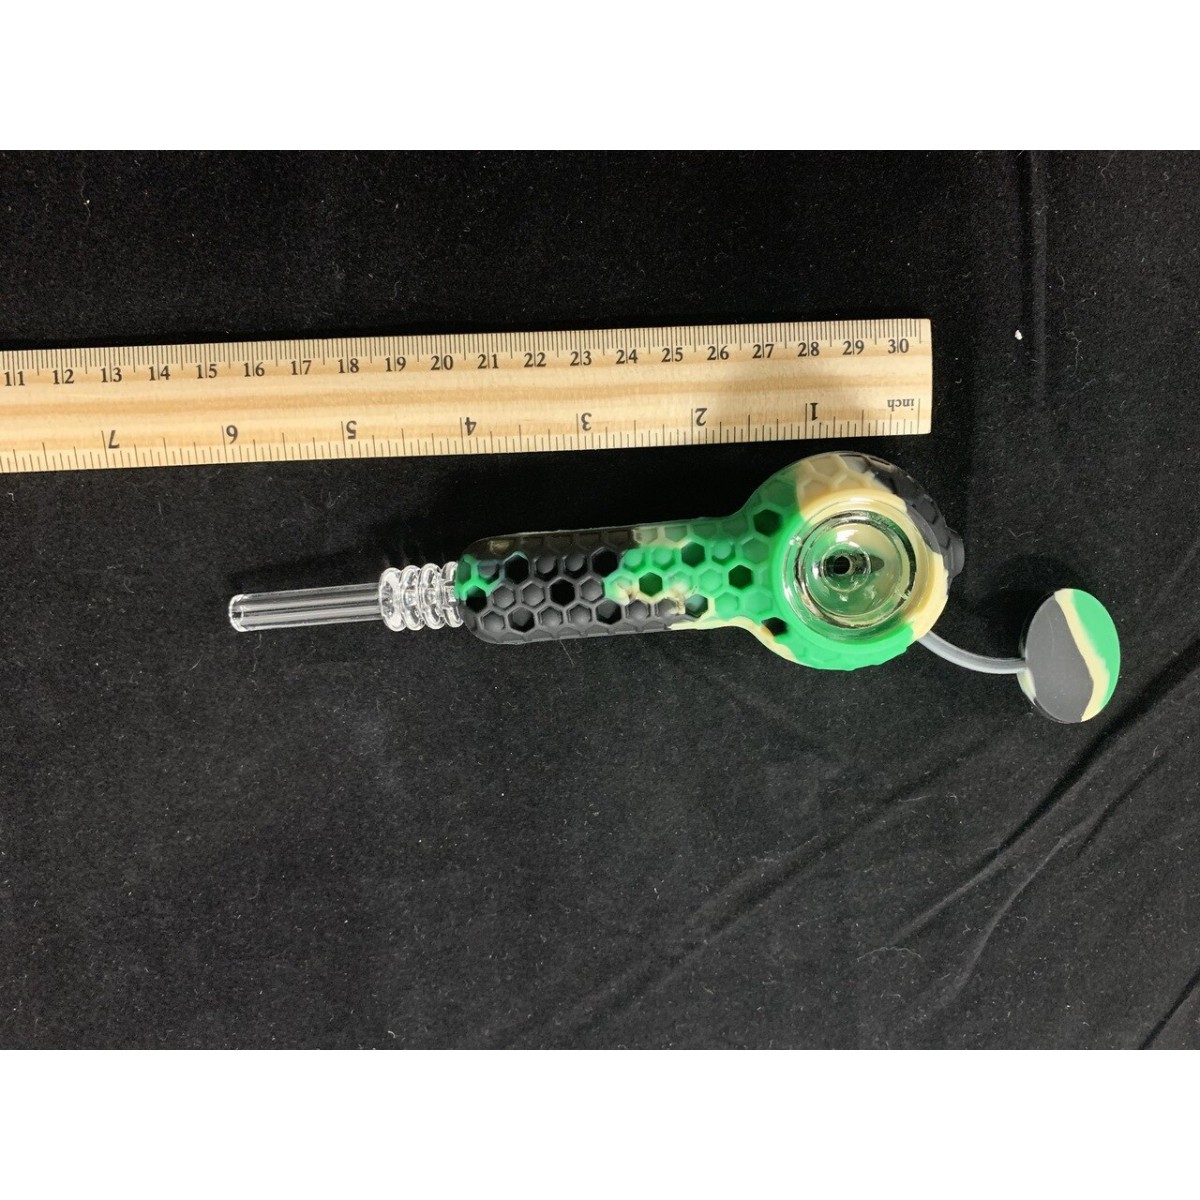 Silicon Handpipe and Nectar Collector Hybrid 2in1